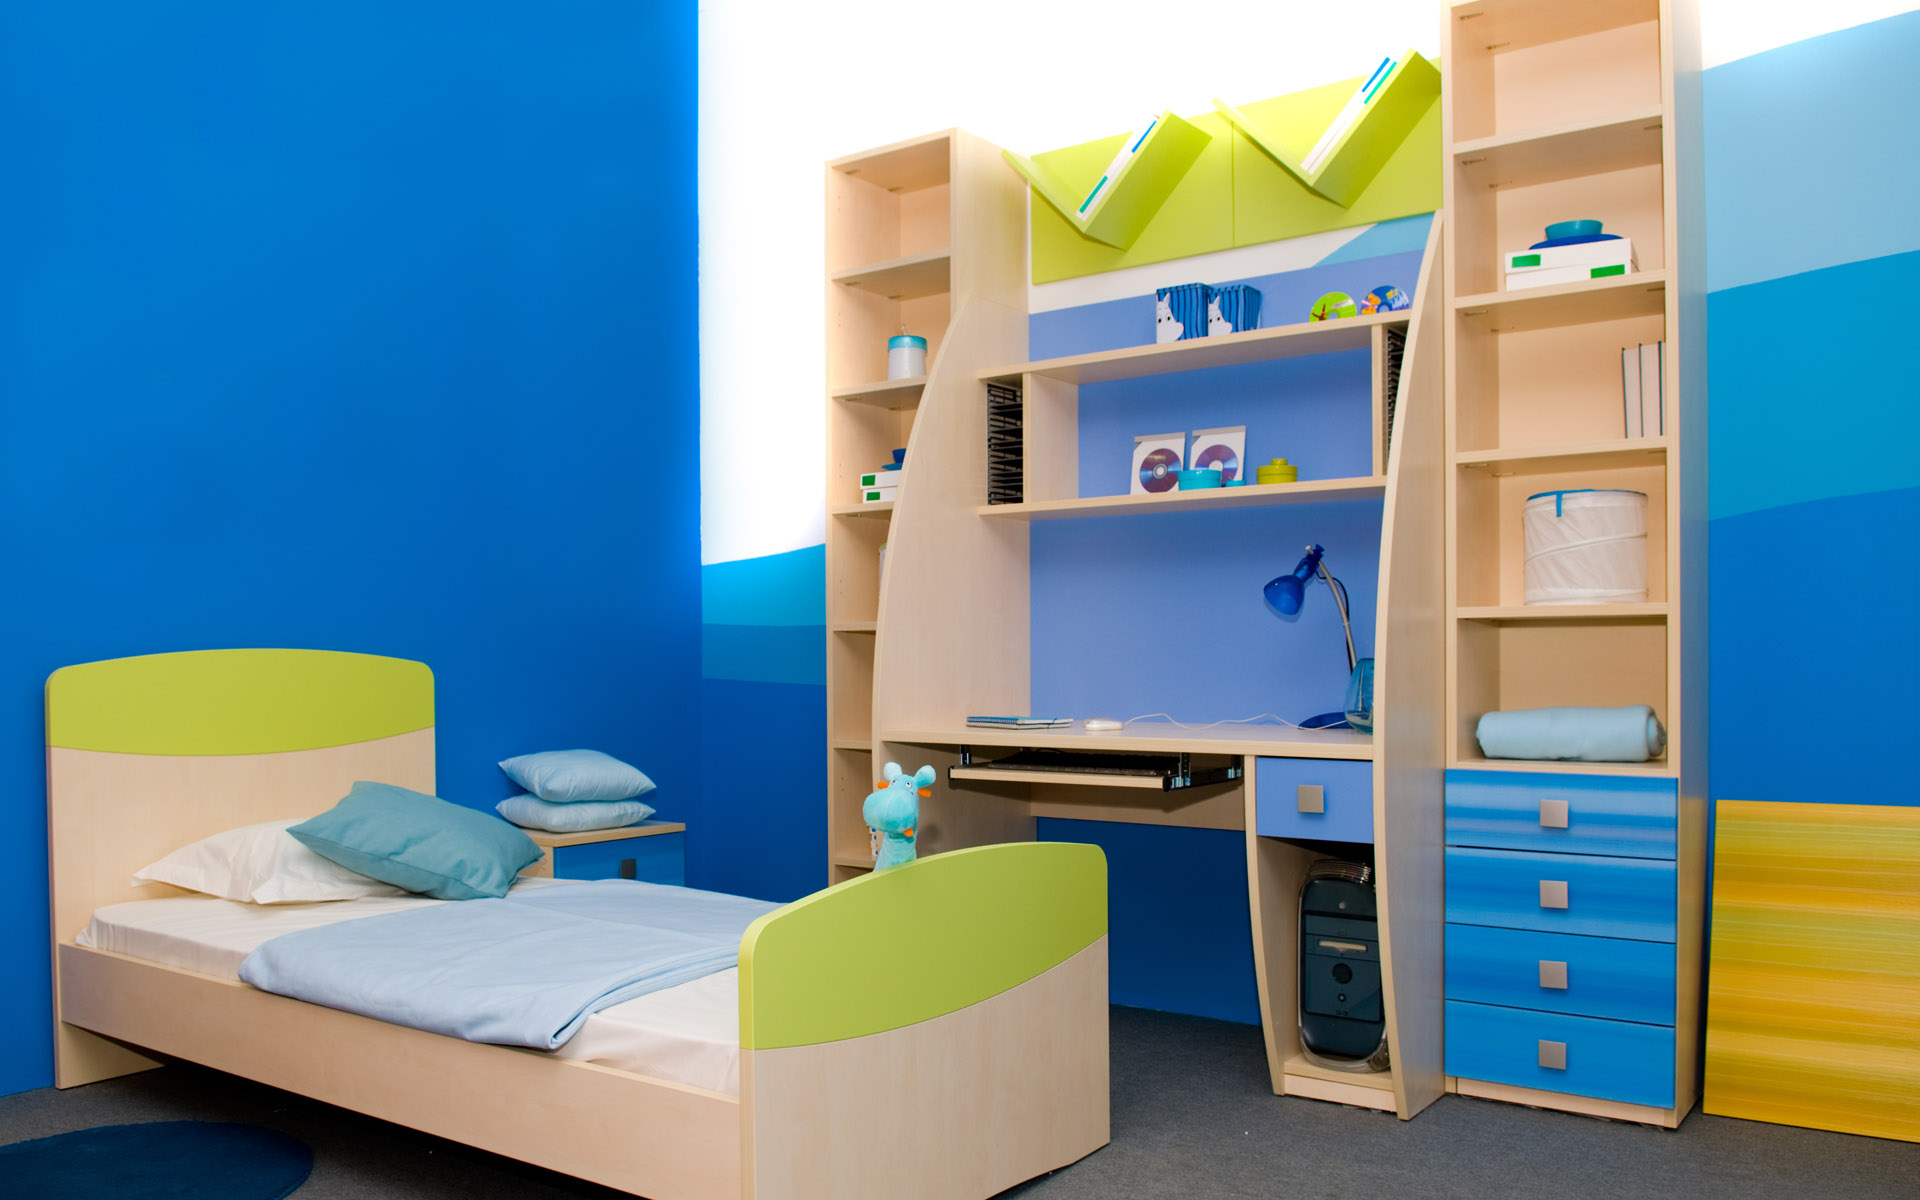 Blue And Wall Astounding Blue And White Accent Wall Color With Single Bed Completed With Nightstand And Desk Combined With Cabinet Plus Drawers Of Kids Room Storage Kids Room The Two Ideas For Making The Kids Room Storage